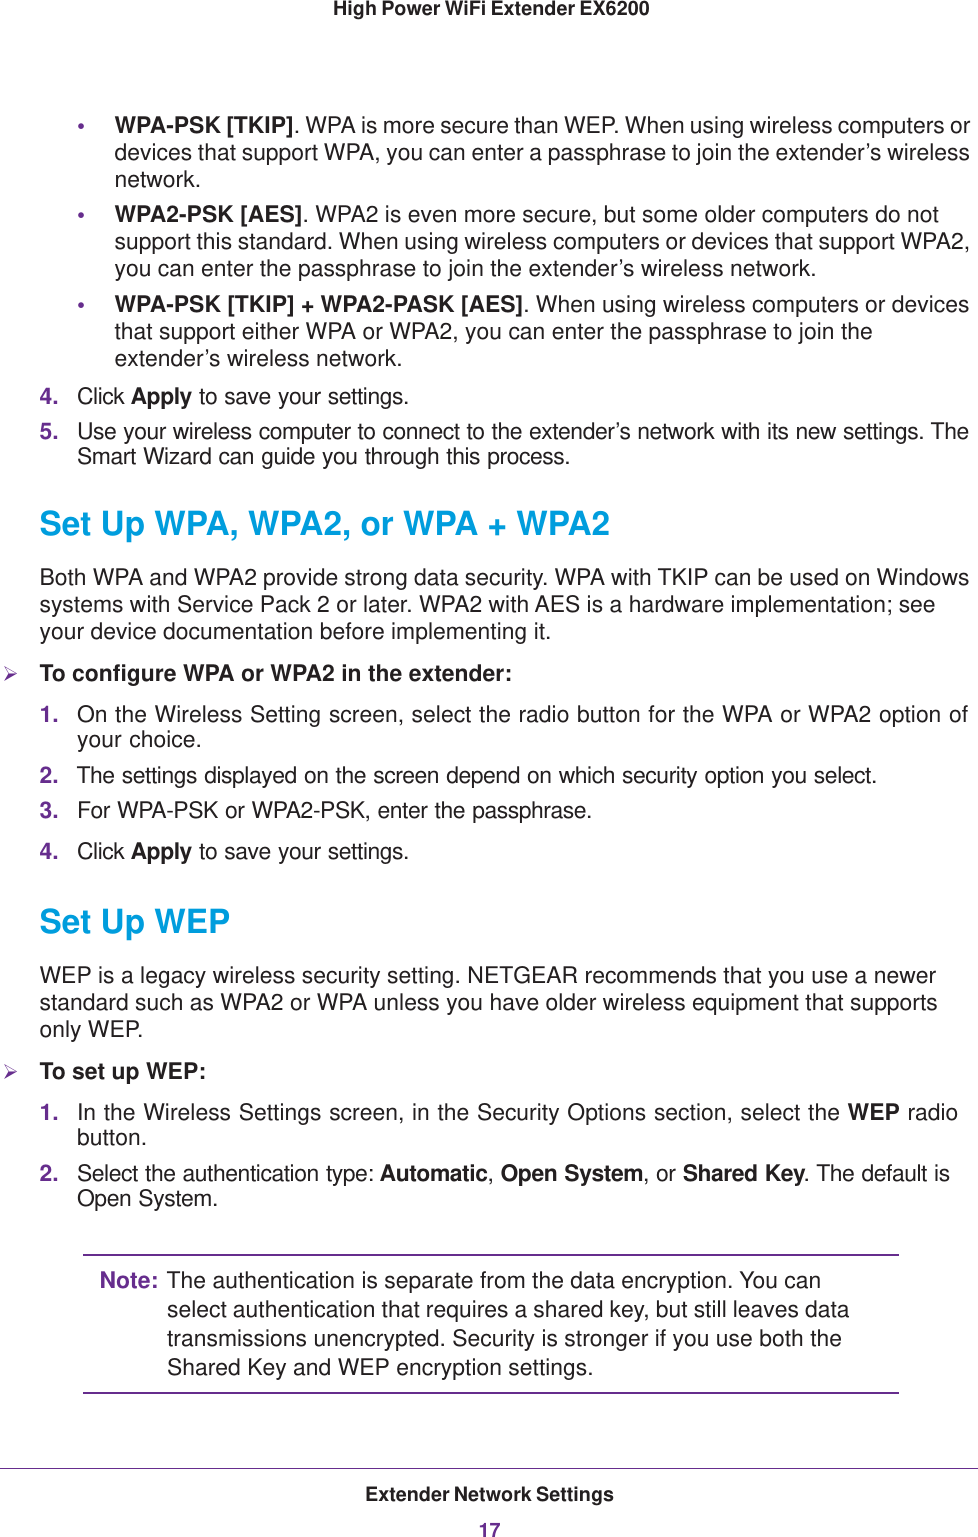 Extender Network Settings17 High Power WiFi Extender EX6200•WPA-PSK [TKIP]. WPA is more secure than WEP. When using wireless computers or devices that support WPA, you can enter a passphrase to join the extender’s wireless network.•WPA2-PSK [AES]. WPA2 is even more secure, but some older computers do not support this standard. When using wireless computers or devices that support WPA2, you can enter the passphrase to join the extender’s wireless network.•WPA-PSK [TKIP] + WPA2-PASK [AES]. When using wireless computers or devices that support either WPA or WPA2, you can enter the passphrase to join the extender’s wireless network.4. Click Apply to save your settings.5. Use your wireless computer to connect to the extender’s network with its new settings. The Smart Wizard can guide you through this process. Set Up WPA, WPA2, or WPA + WPA2Both WPA and WPA2 provide strong data security. WPA with TKIP can be used on Windows systems with Service Pack 2 or later. WPA2 with AES is a hardware implementation; see your device documentation before implementing it. To configure WPA or WPA2 in the extender:1. On the Wireless Setting screen, select the radio button for the WPA or WPA2 option of your choice.2. The settings displayed on the screen depend on which security option you select.3. For WPA-PSK or WPA2-PSK, enter the passphrase. 4. Click Apply to save your settings.Set Up WEPWEP is a legacy wireless security setting. NETGEAR recommends that you use a newer standard such as WPA2 or WPA unless you have older wireless equipment that supports only WEP.To set up WEP:1. In the Wireless Settings screen, in the Security Options section, select the WEP radio button.2. Select the authentication type: Automatic, Open System, or Shared Key. The default is Open System.Note: The authentication is separate from the data encryption. You can select authentication that requires a shared key, but still leaves data transmissions unencrypted. Security is stronger if you use both the Shared Key and WEP encryption settings.